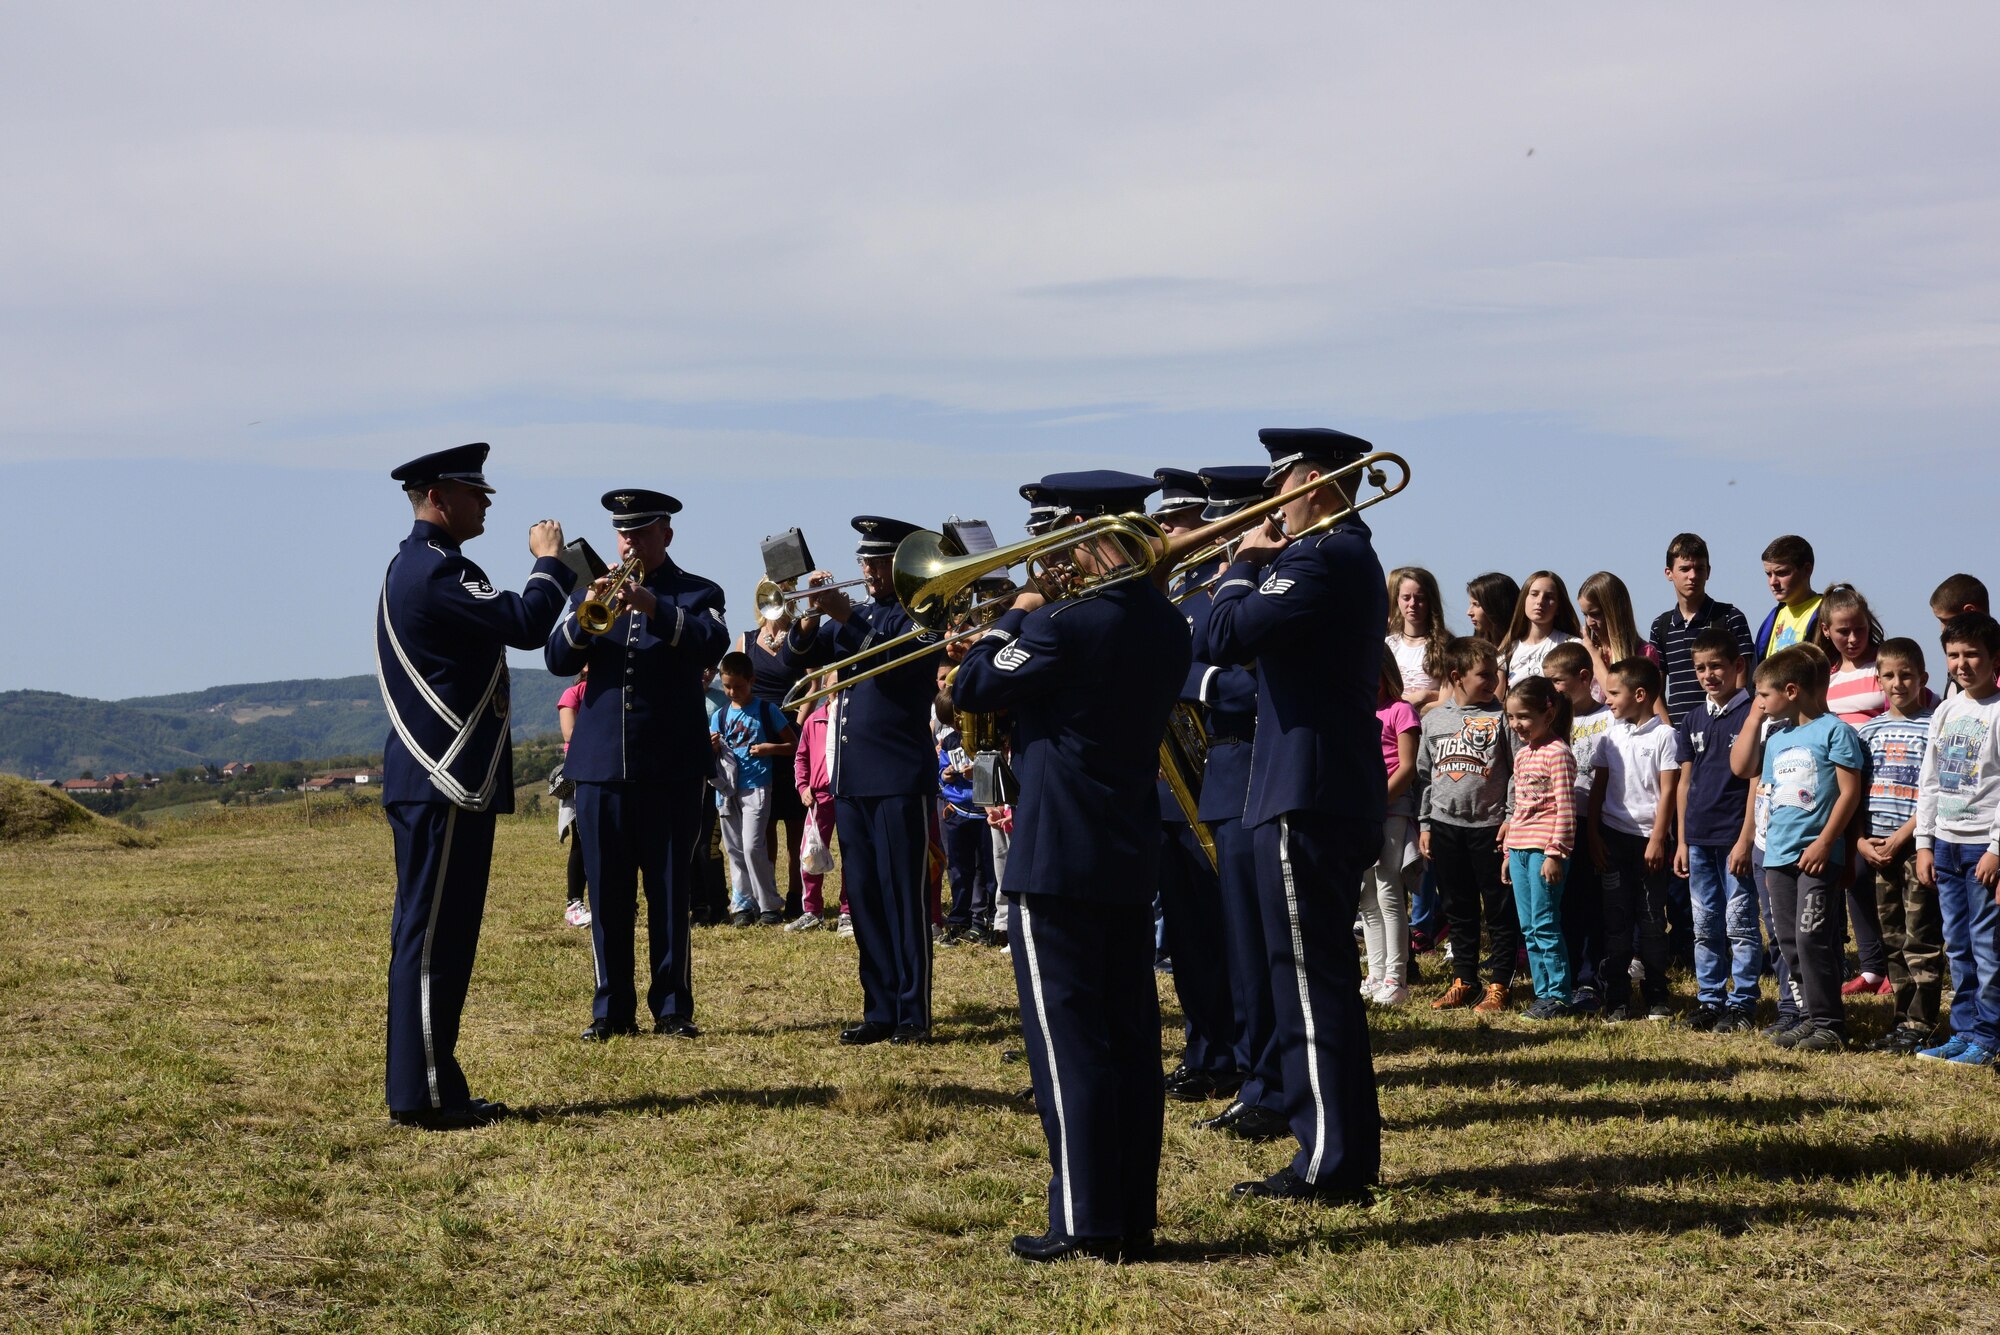 The U.S. Air Forces in Europe jazz band performs the Serbian national anthem at the 73rd Halyard Mission ceremony at Galobica Field in Pranjani, Serbia, Sept. 16, 2017.